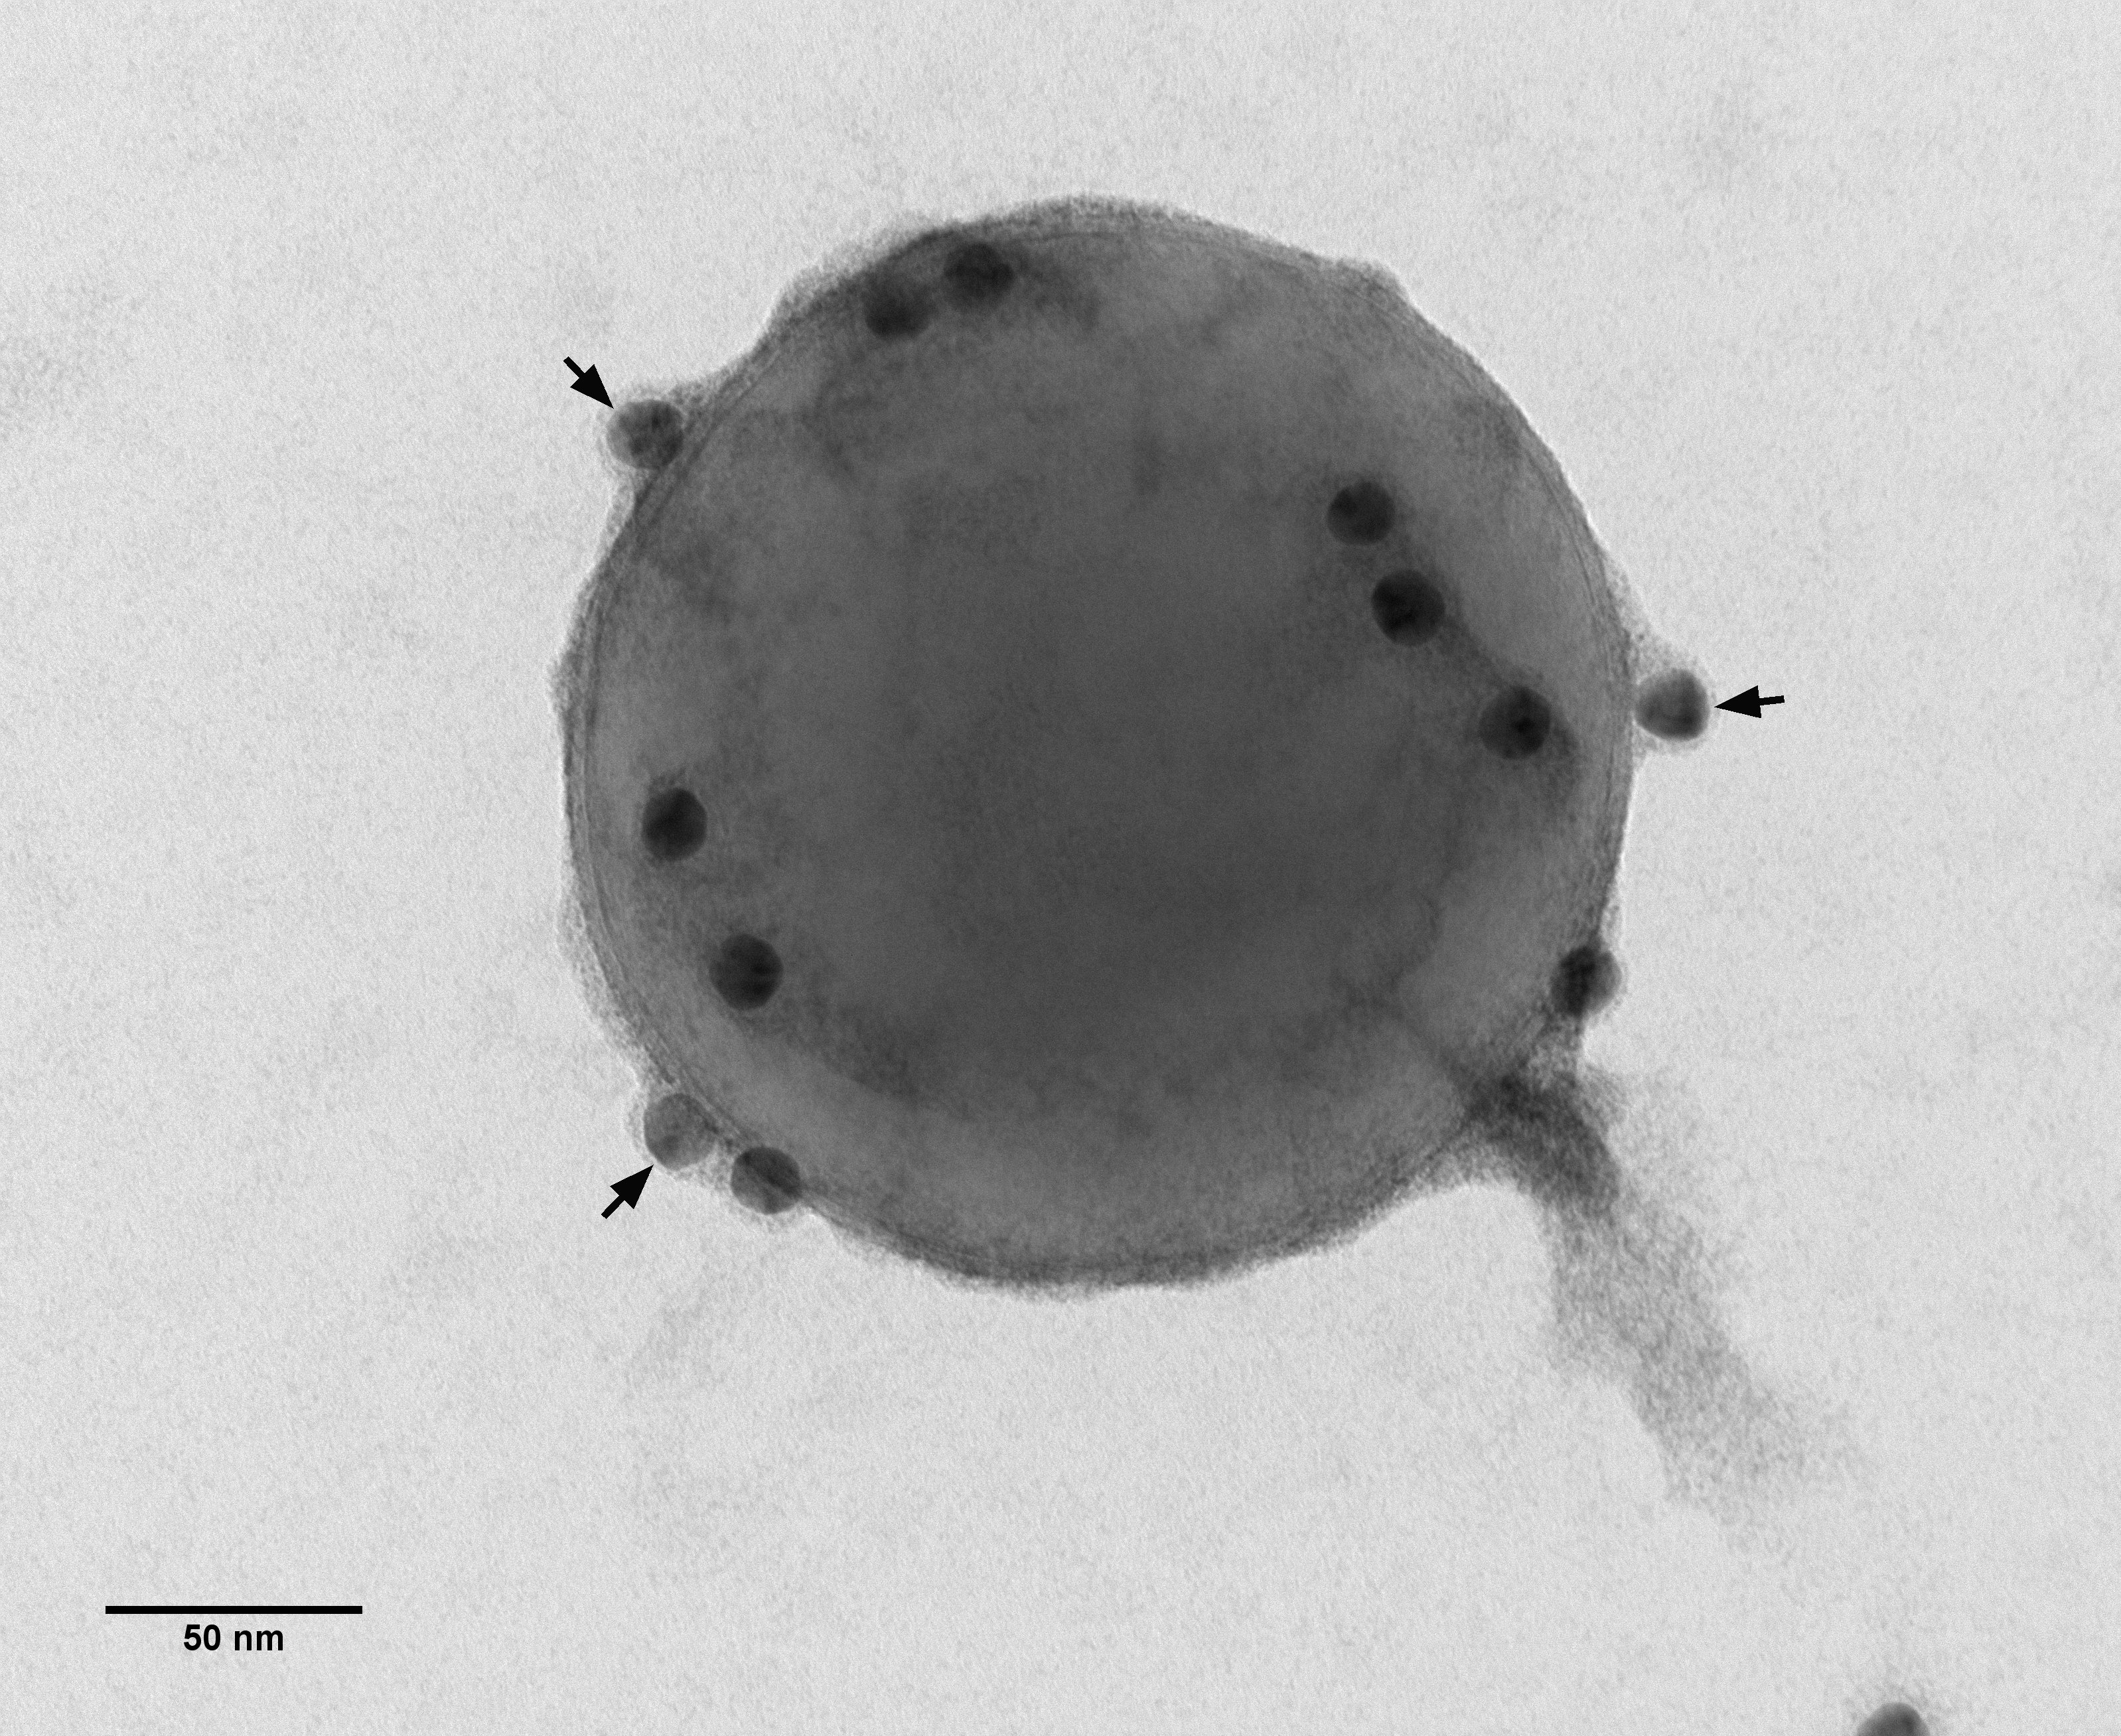 Exosomes isolated from cell culture supernatant: immuno-staining using the exosome marker anti-CD63 and a secondary antibody tagged with 15 nm gold particles (arrows), followed by uranyl acetate staining (Karin Müller, Prof. Catherine Shanahan, King’s Col